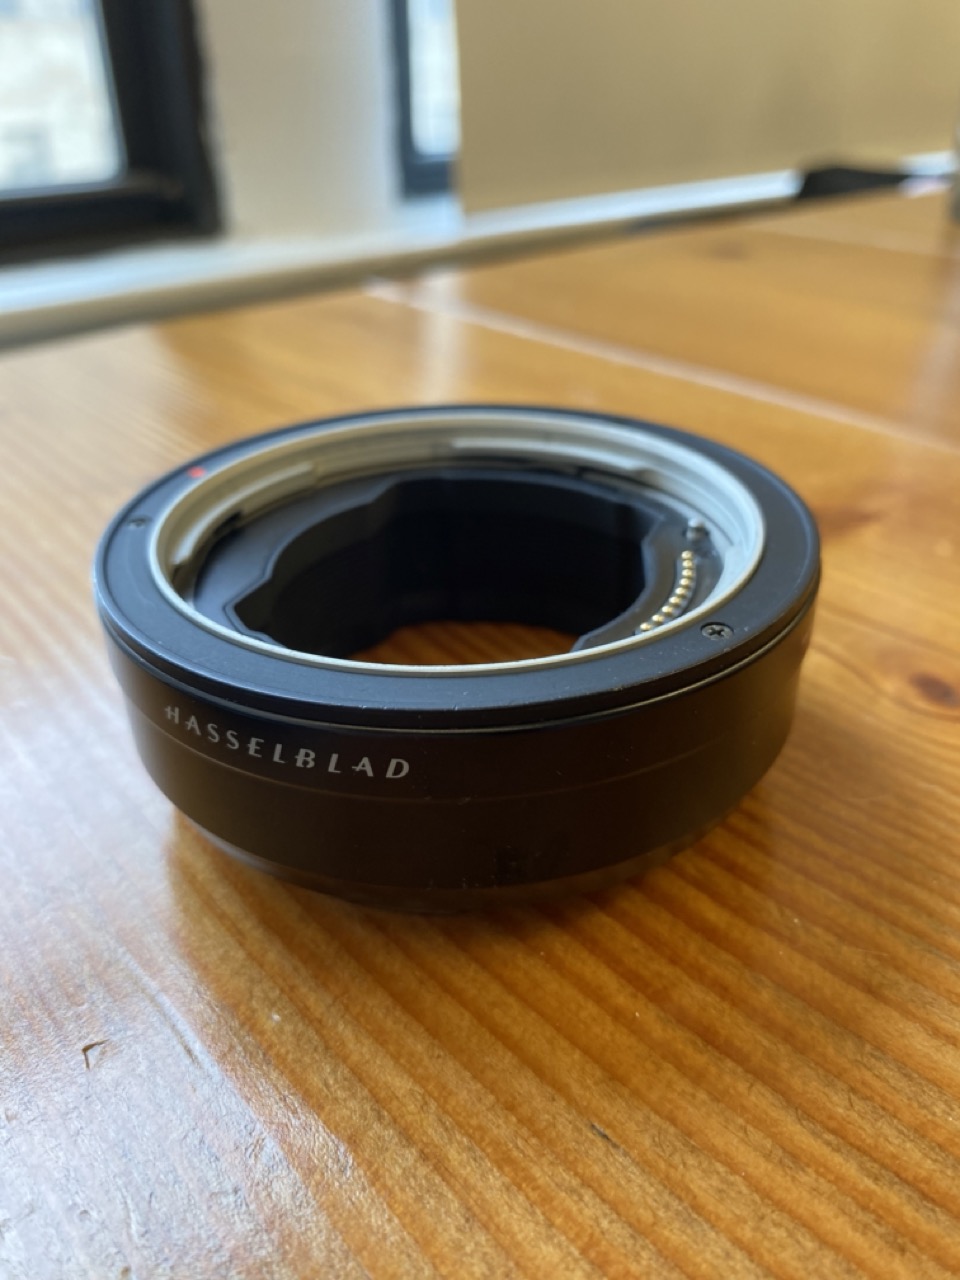 Hasselblad H 26mm Extension Tube